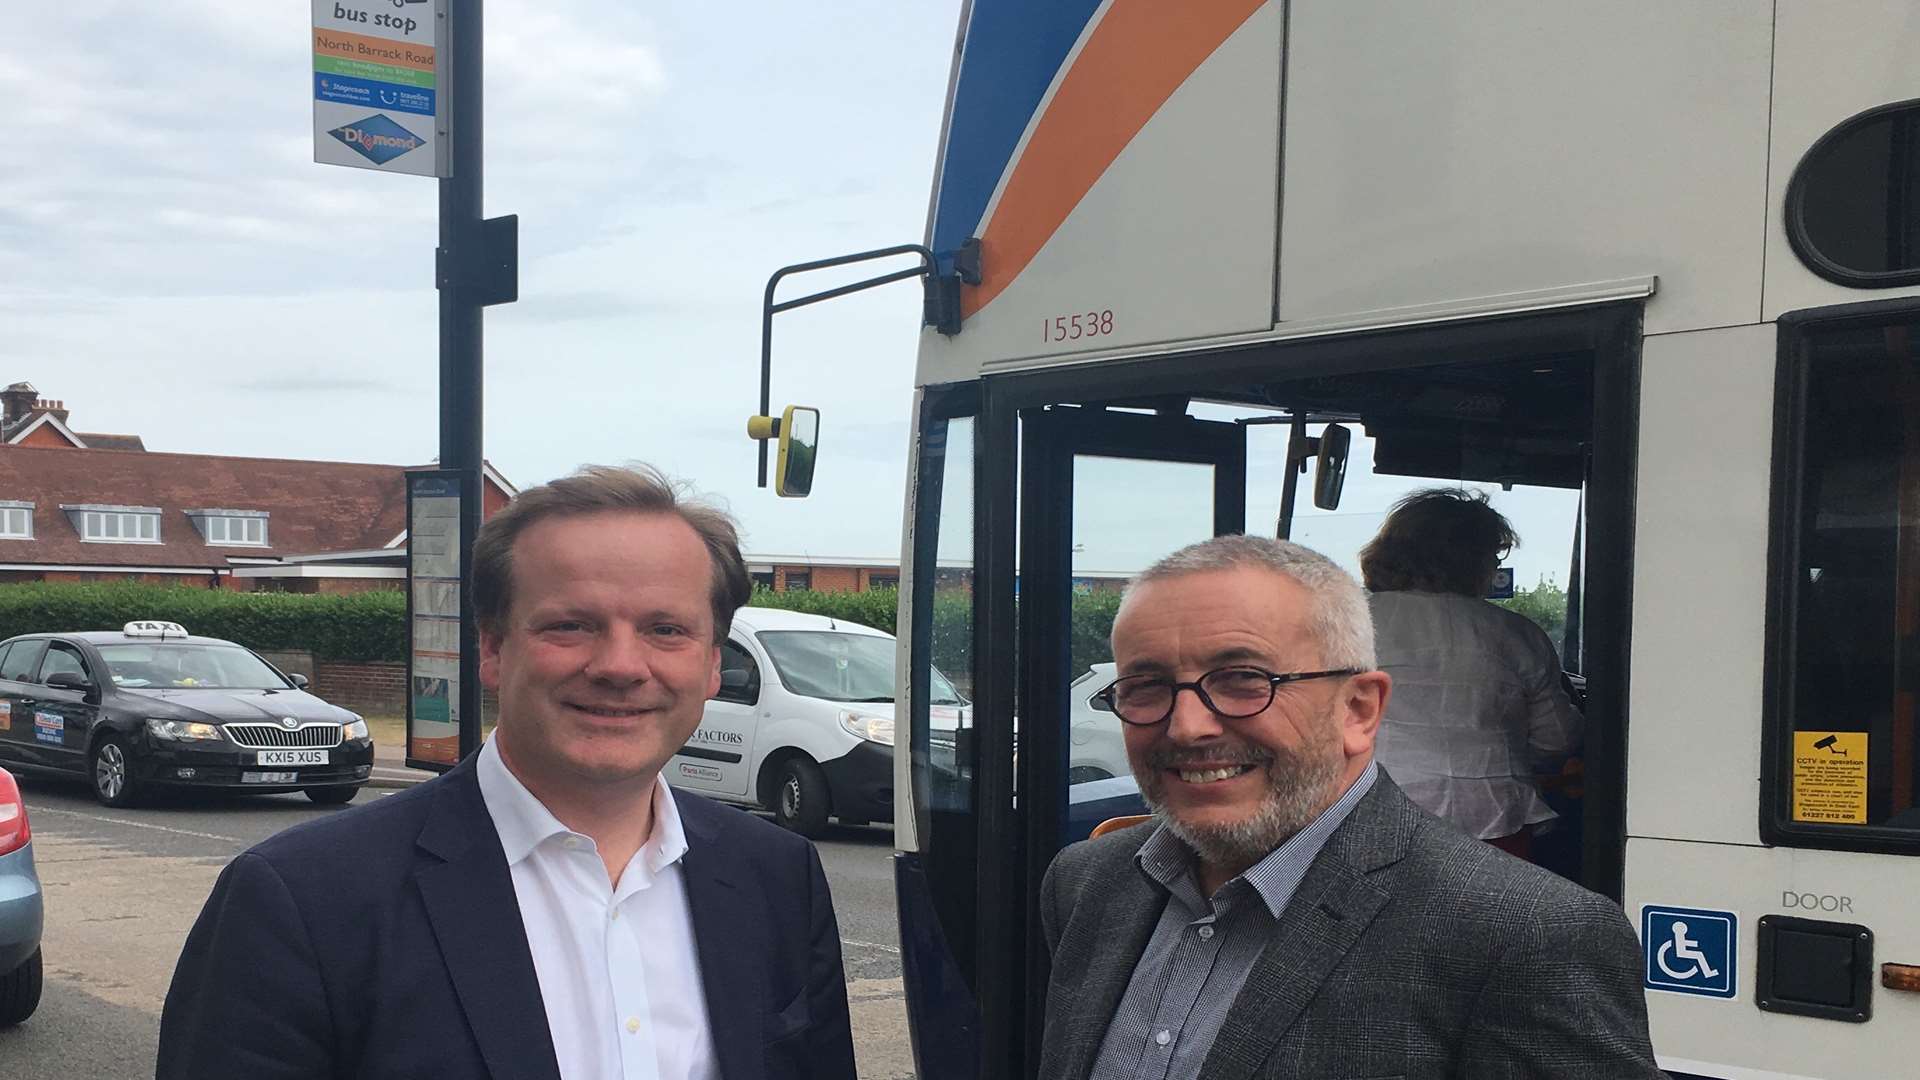 MP Charlie Elphicke with Philip Norwell of Stagecoach.